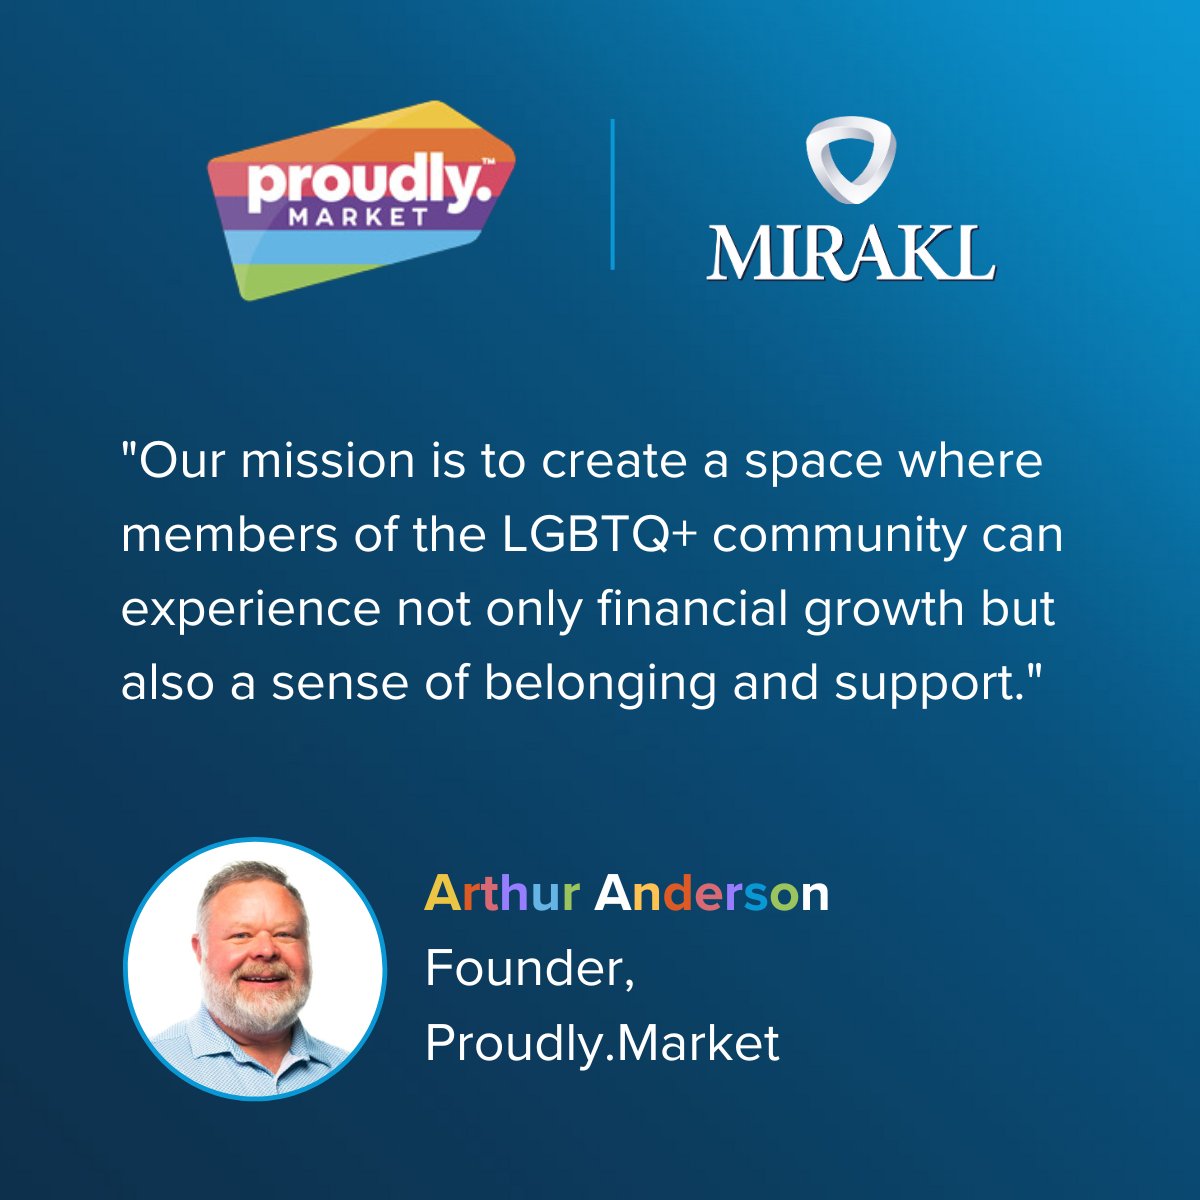 We are proud partners of @MarketProudly 🏳️‍🌈 the platform empowering LGBTQ+ individuals, businesses and nonprofit organizations by giving them a dedicated space to connect, promote their activity, expertise and find everything they need while supporting their community 🚀